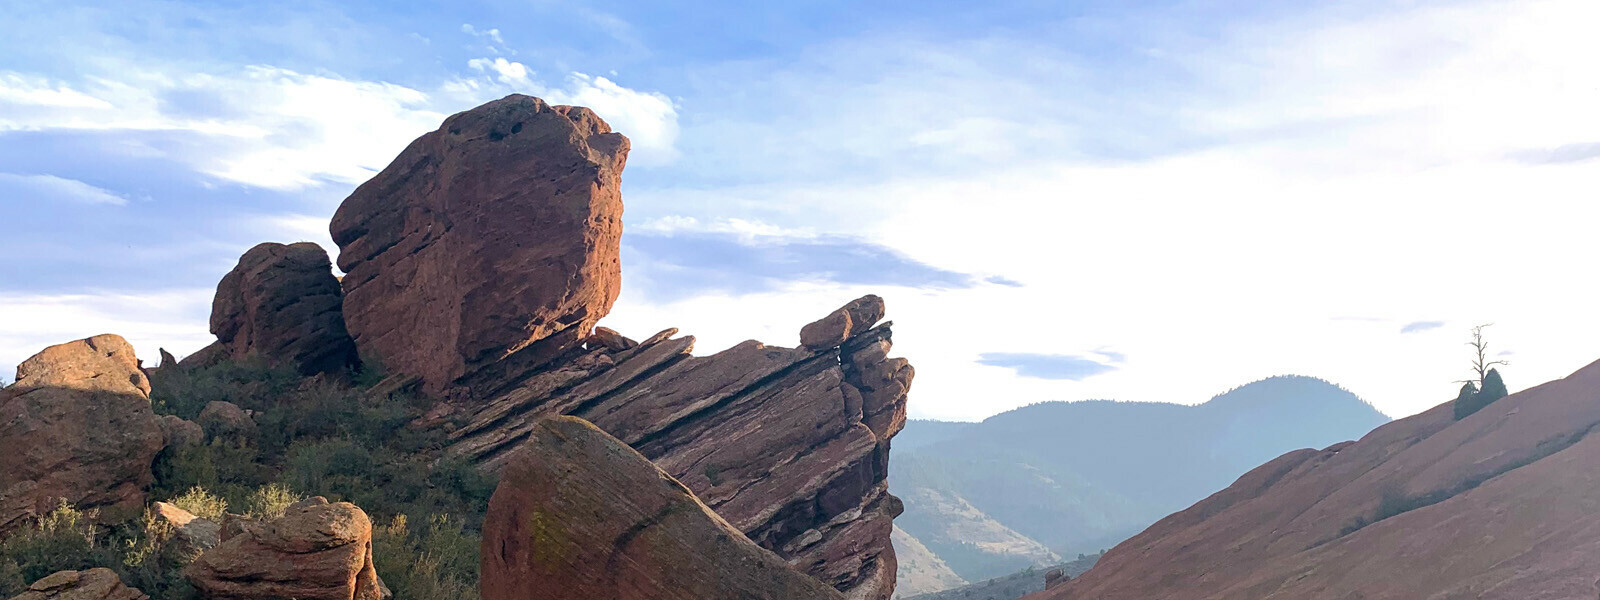 Beautiful rock formations at Red Rocks Park in Colorado.